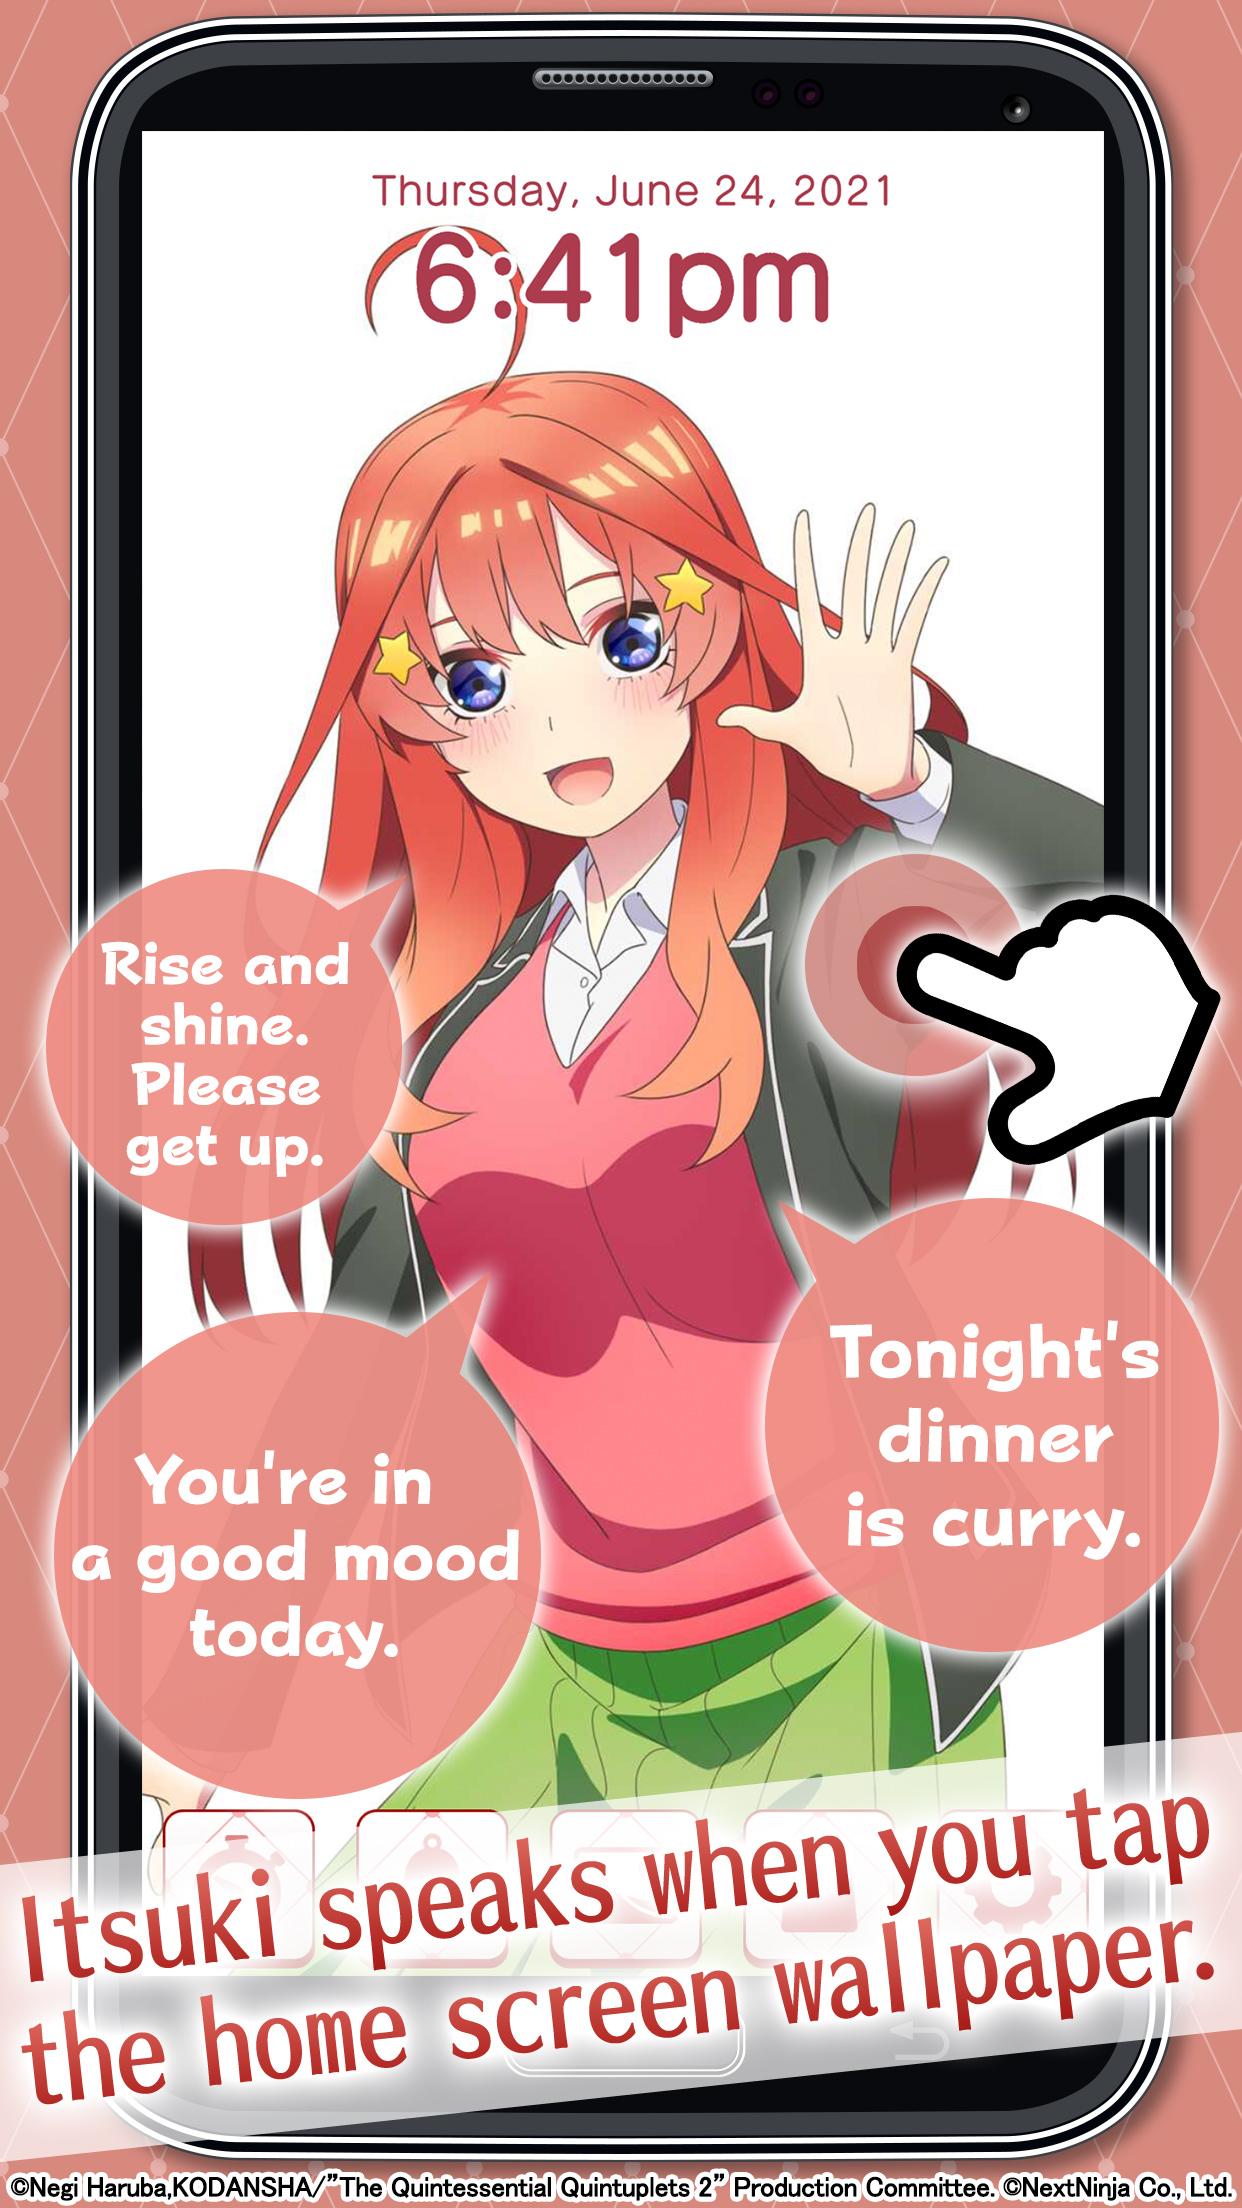 Quintuplets Alarm - Itsuki Latest Version 1.0.0 for Android